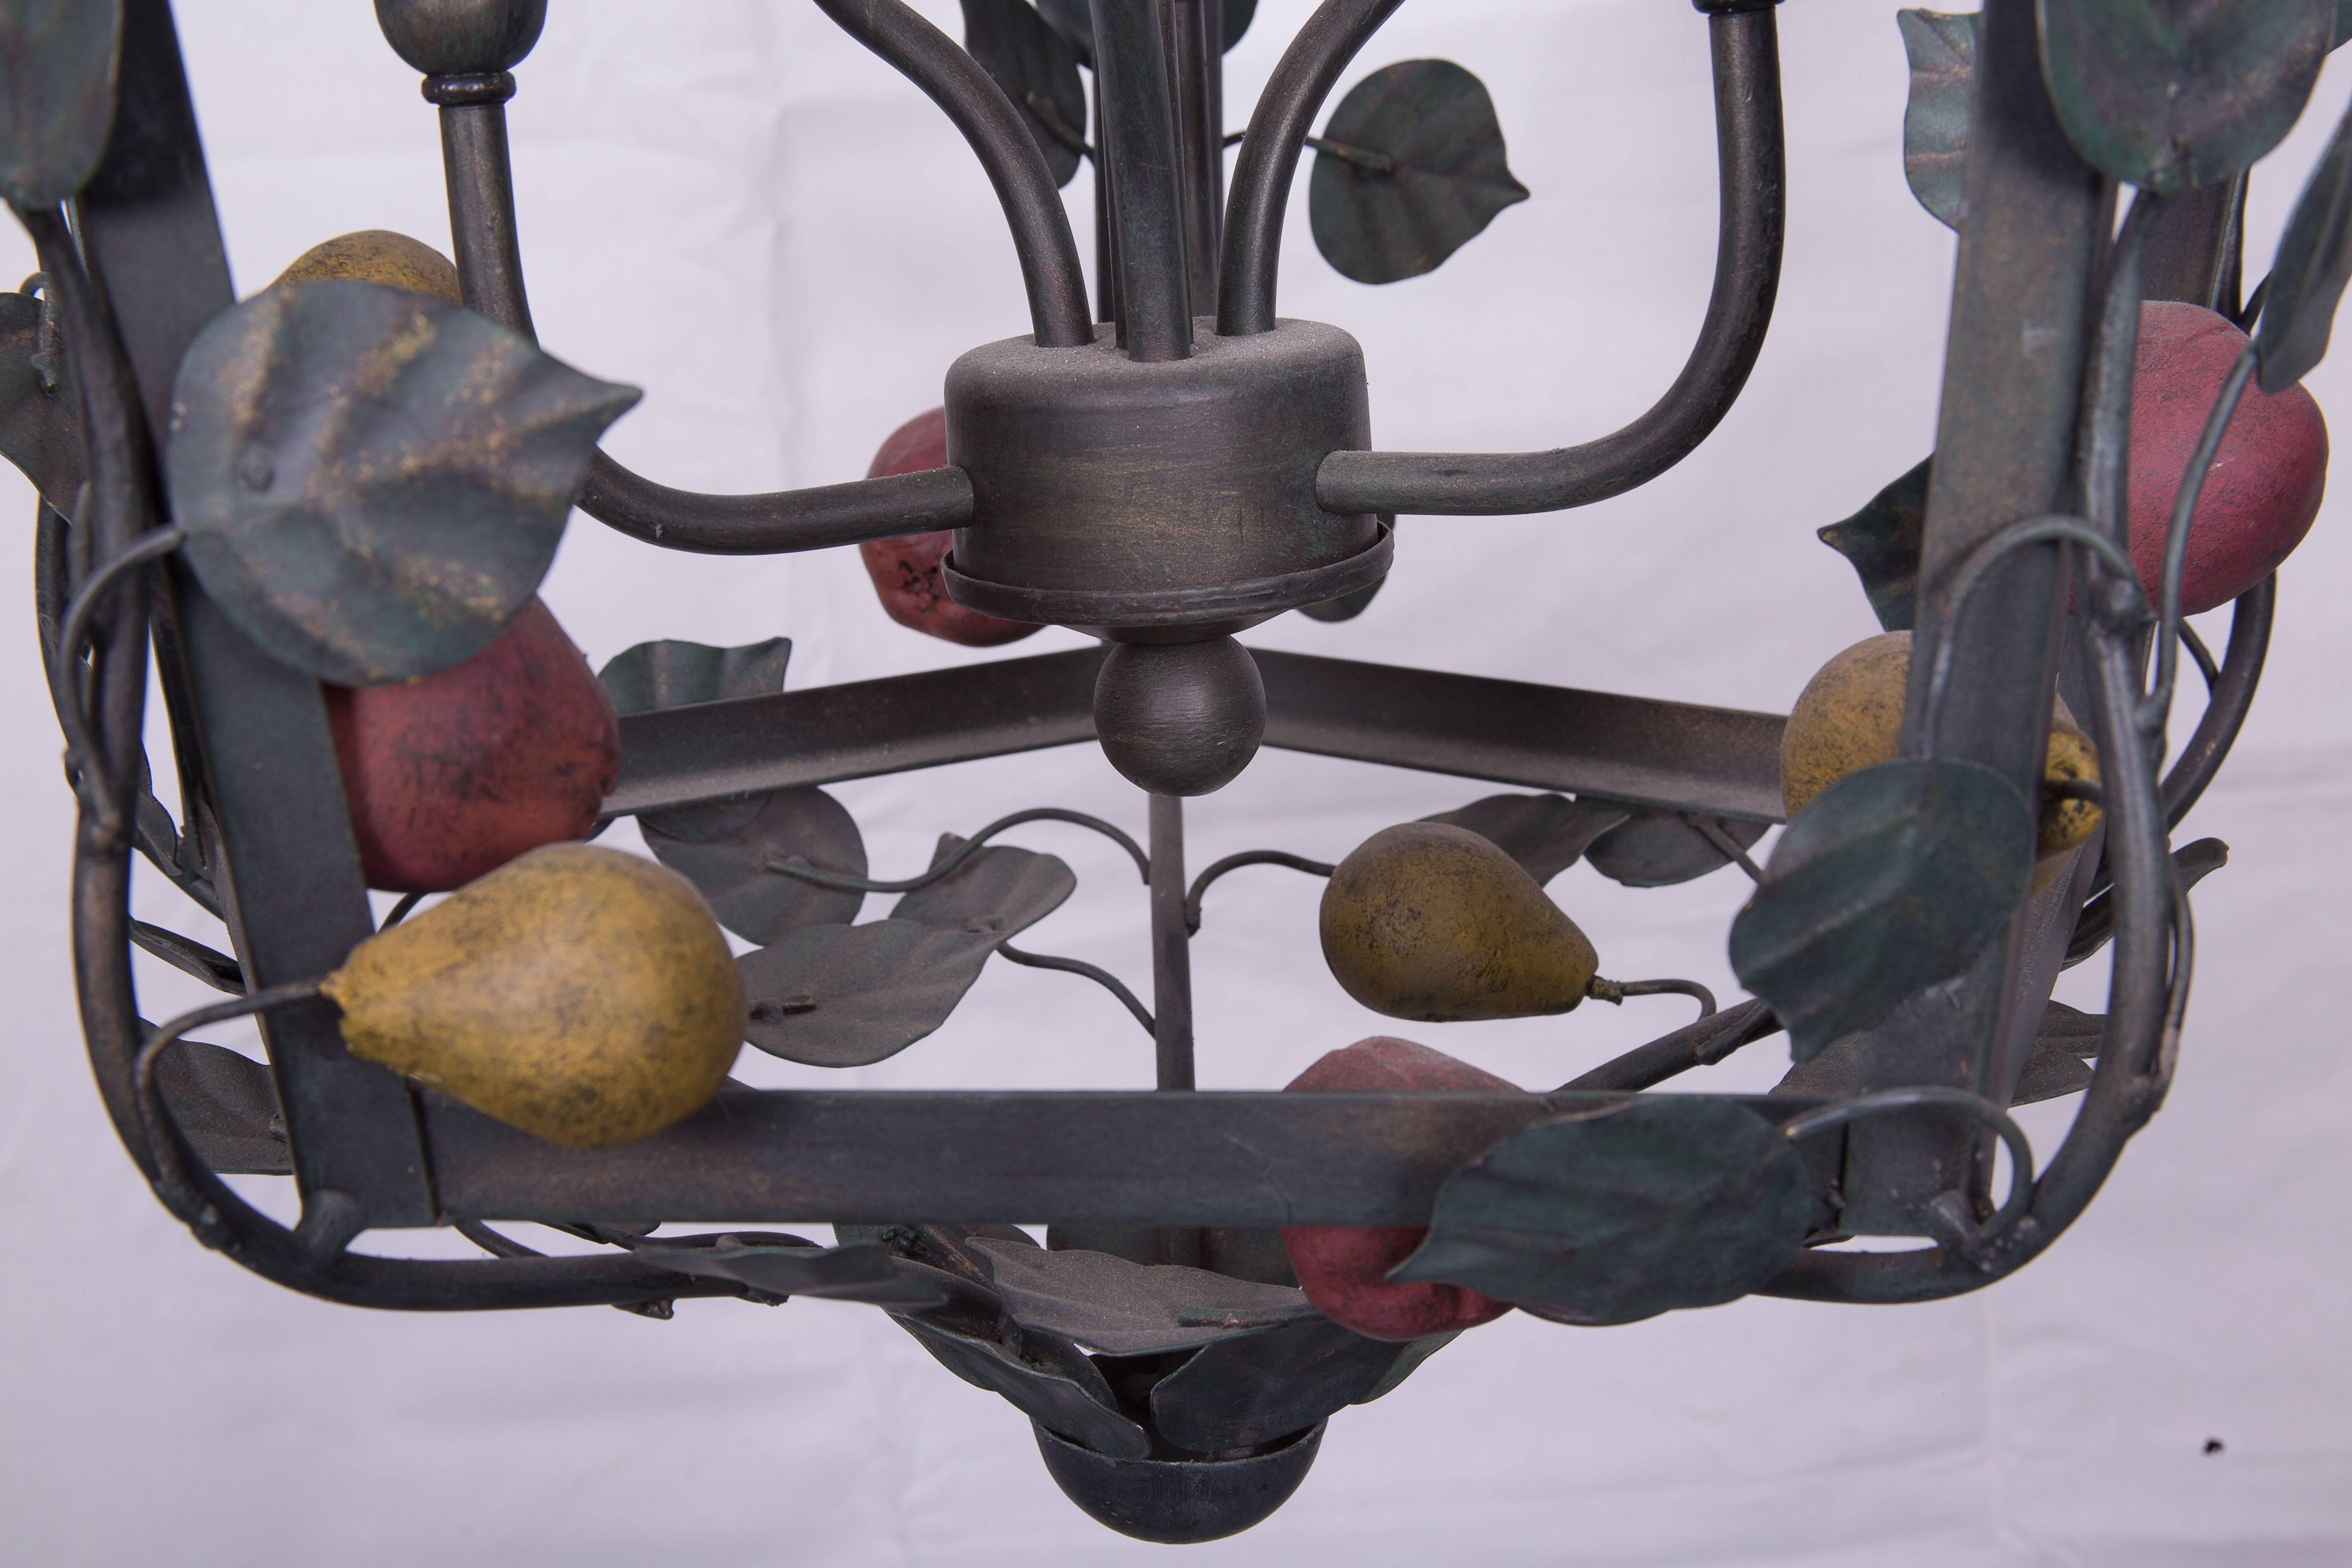 Painted Italian Polychrome Lantern Garnished with Fruits and Vines